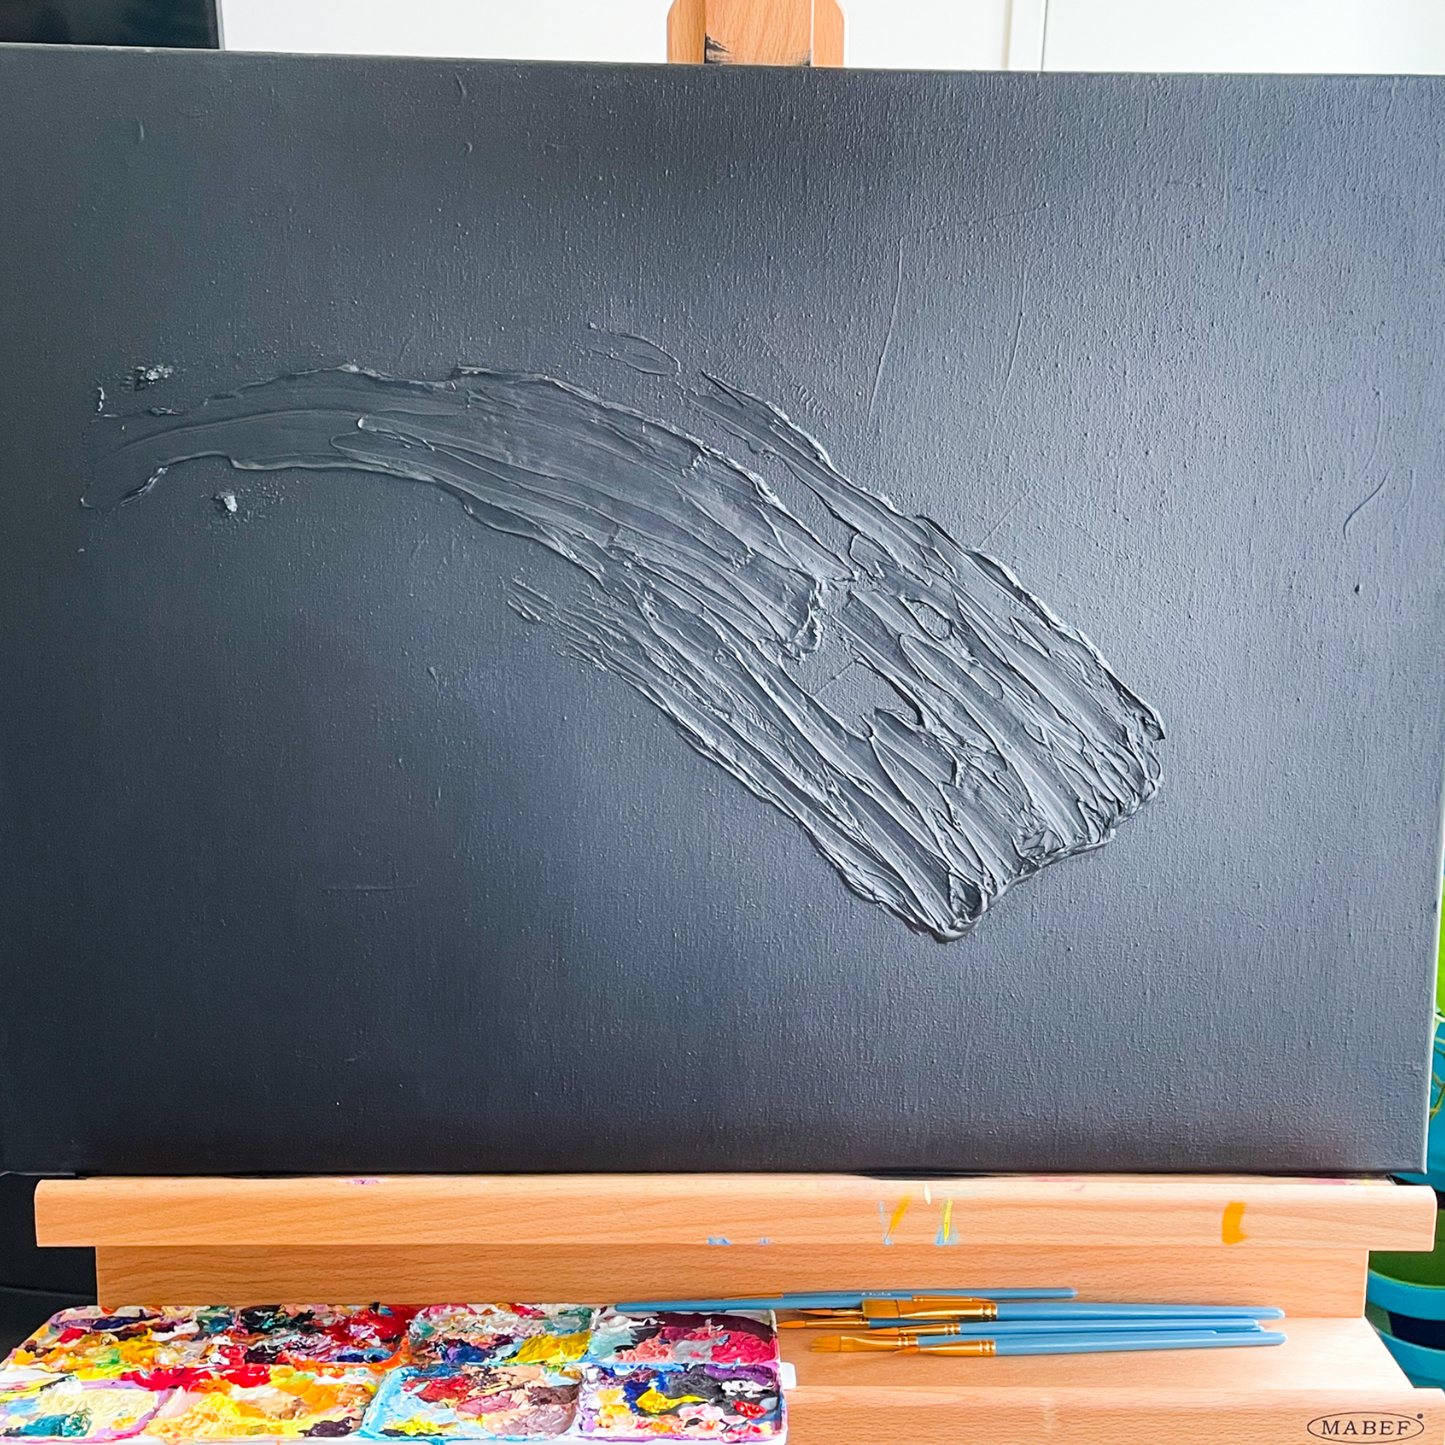 On an easel is a black painting with a large textured downward swoosh. Underneath the easel is a paint palette and paint brushes.